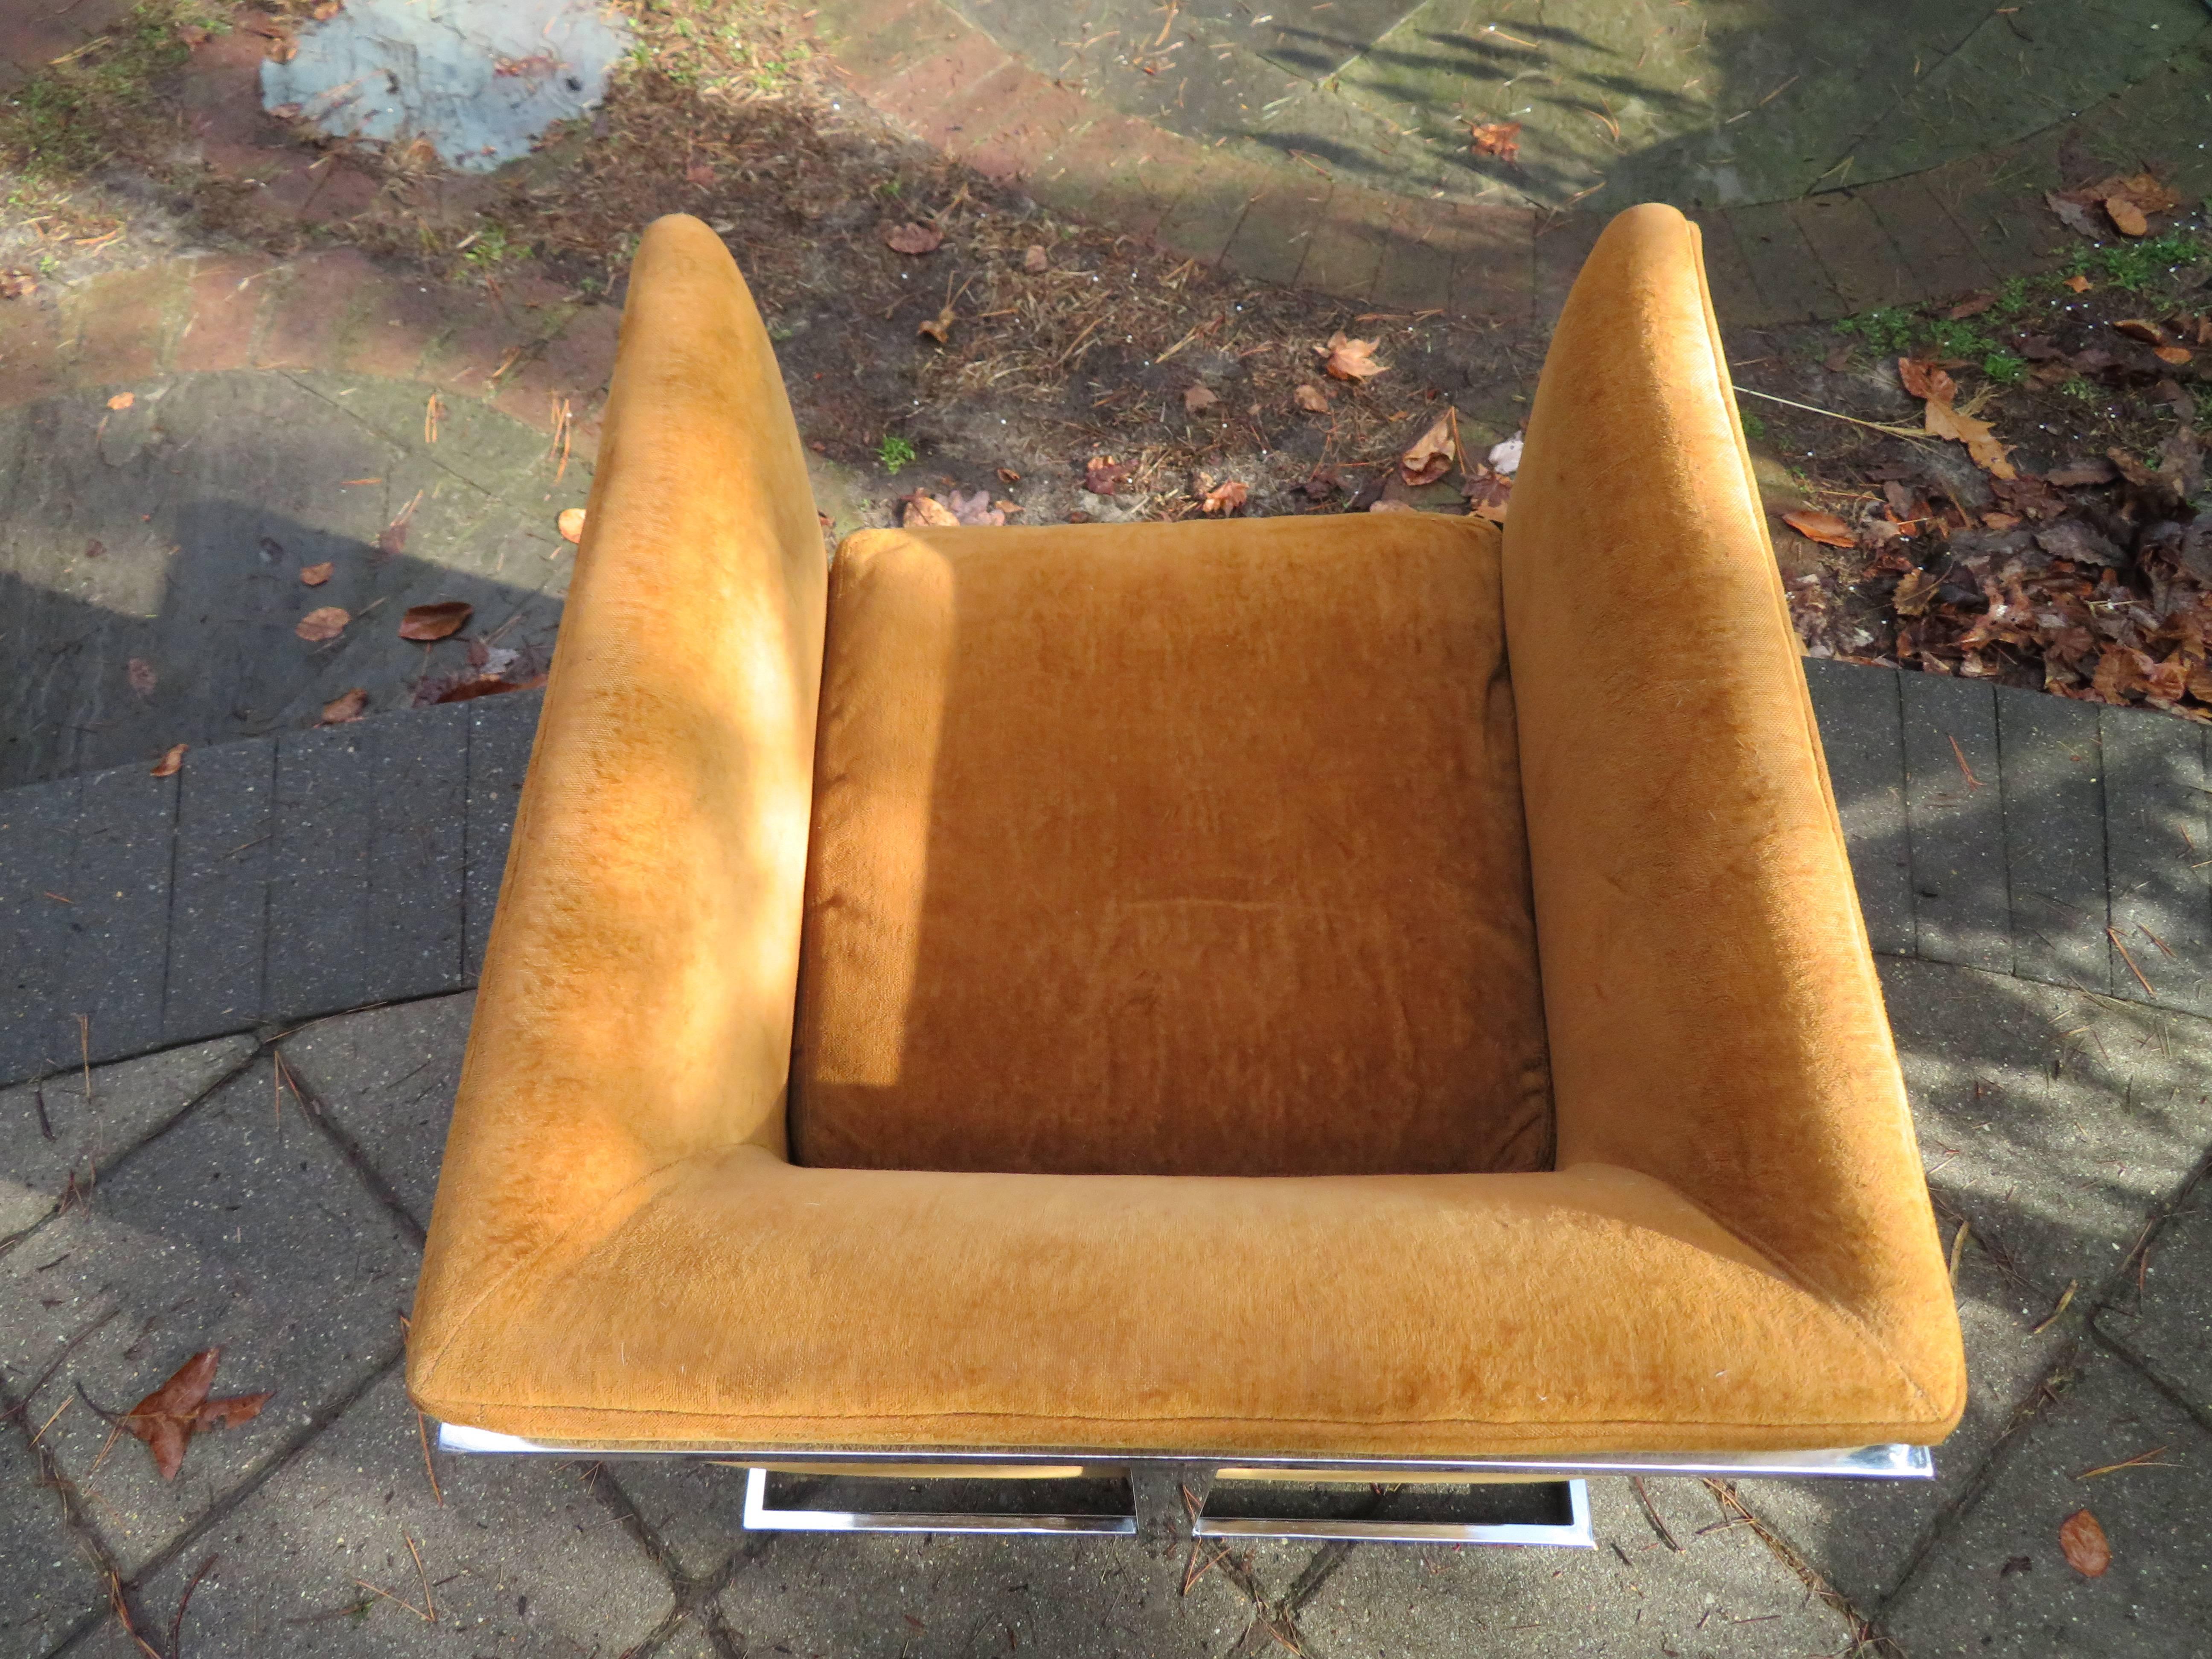 Petite Milo Baughman Chrome Cube Lounge Chair, Mid-Century Modern In Good Condition For Sale In Pemberton, NJ